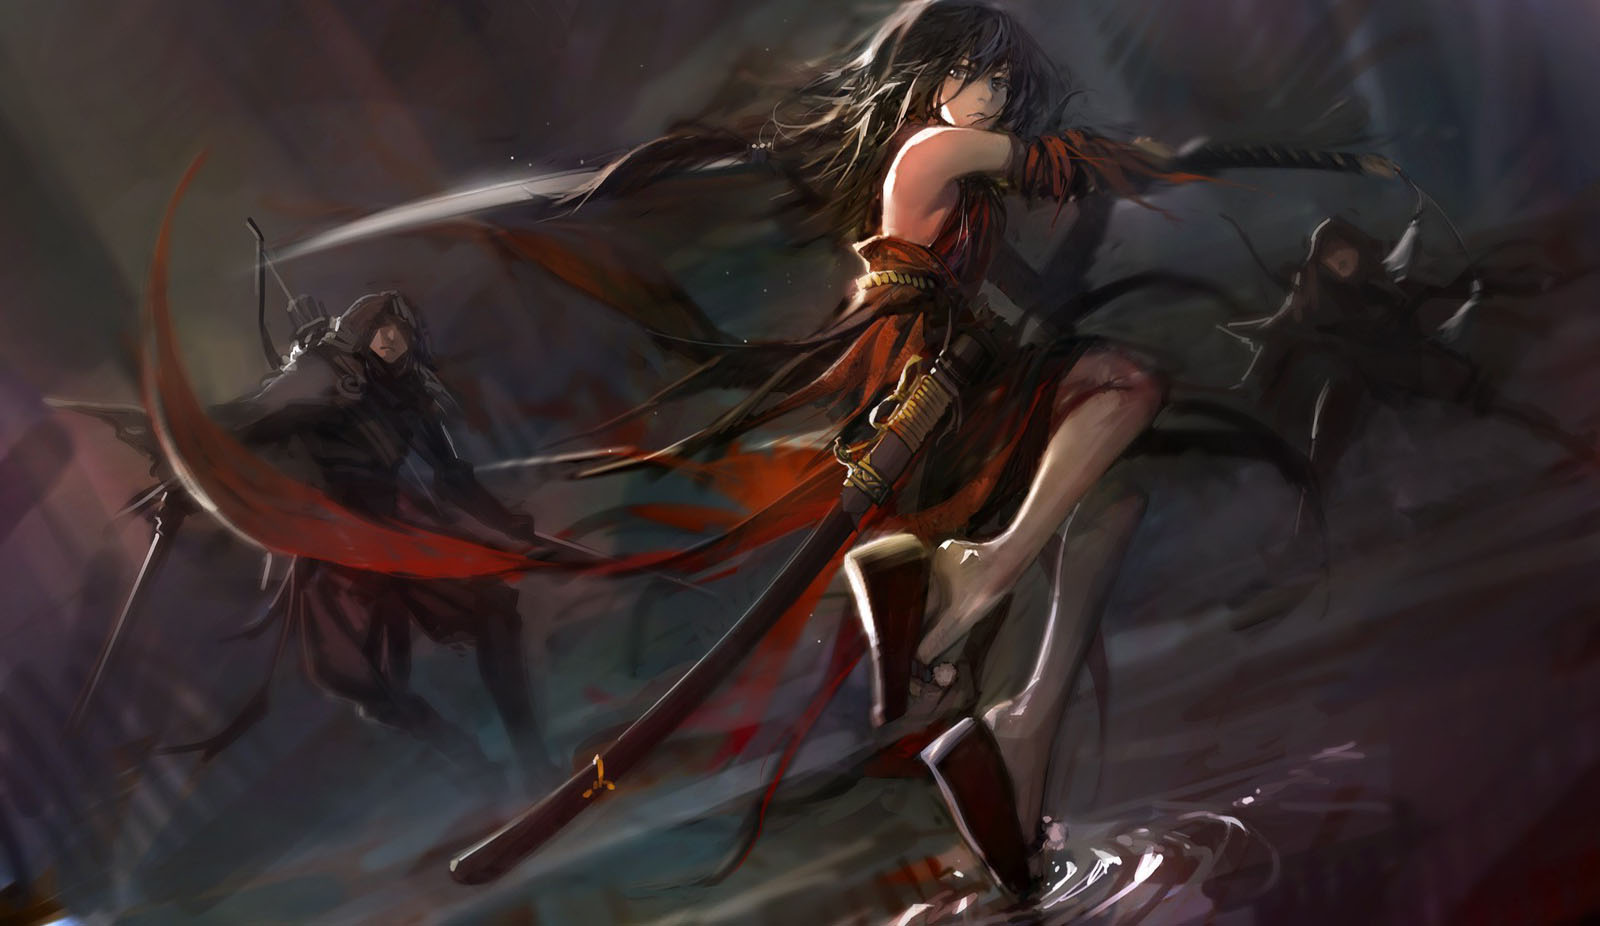 Soft Shading Anime Girls And Swords Wallpaper